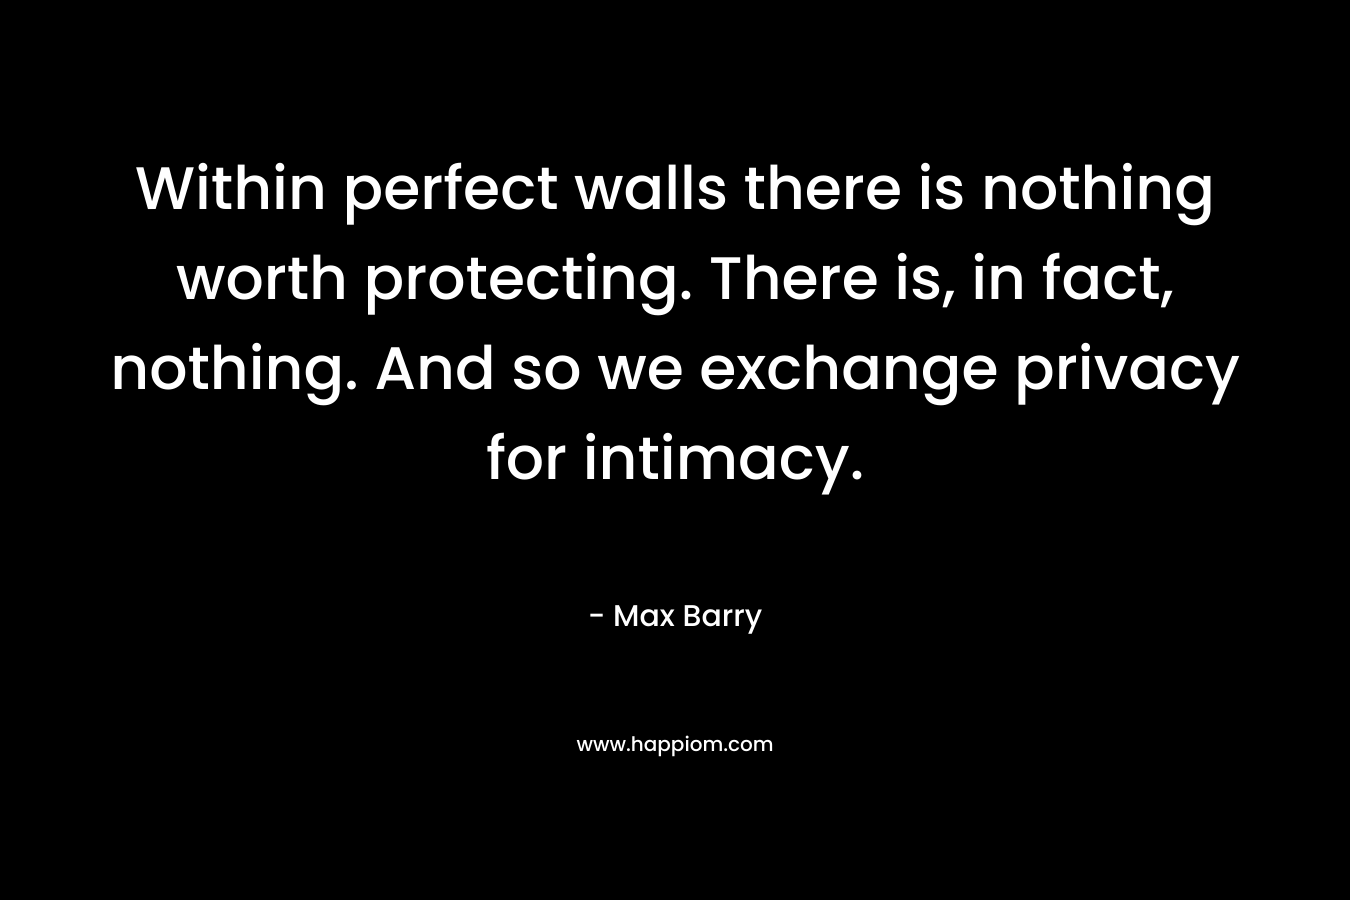 Within perfect walls there is nothing worth protecting. There is, in fact, nothing. And so we exchange privacy for intimacy.